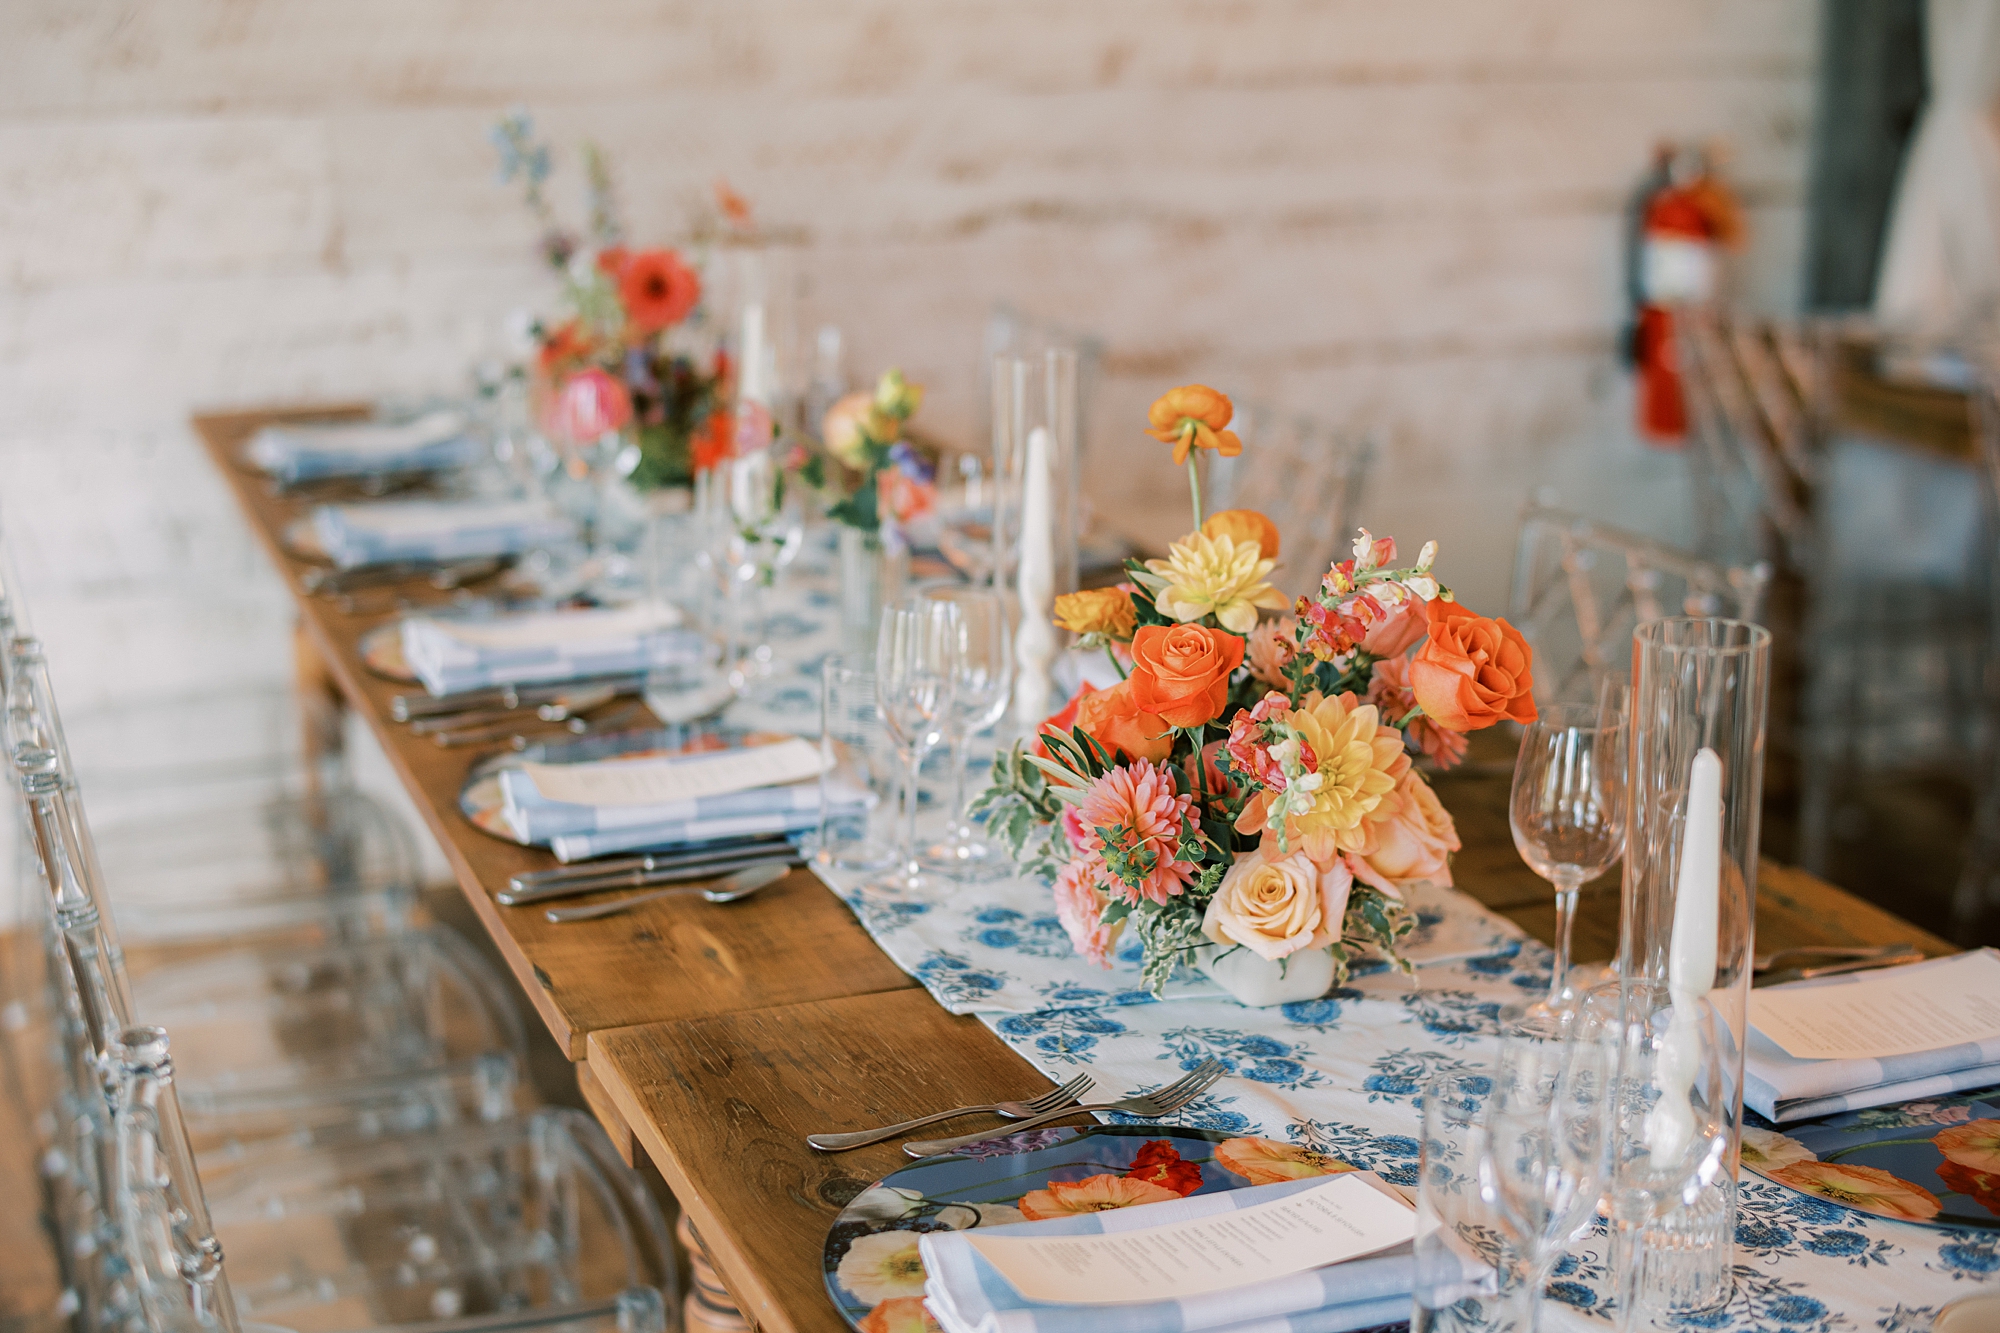 wedding reception with rustic wooden tables, blue and white table runner and bright flower centerpieces at Terrain Gardens